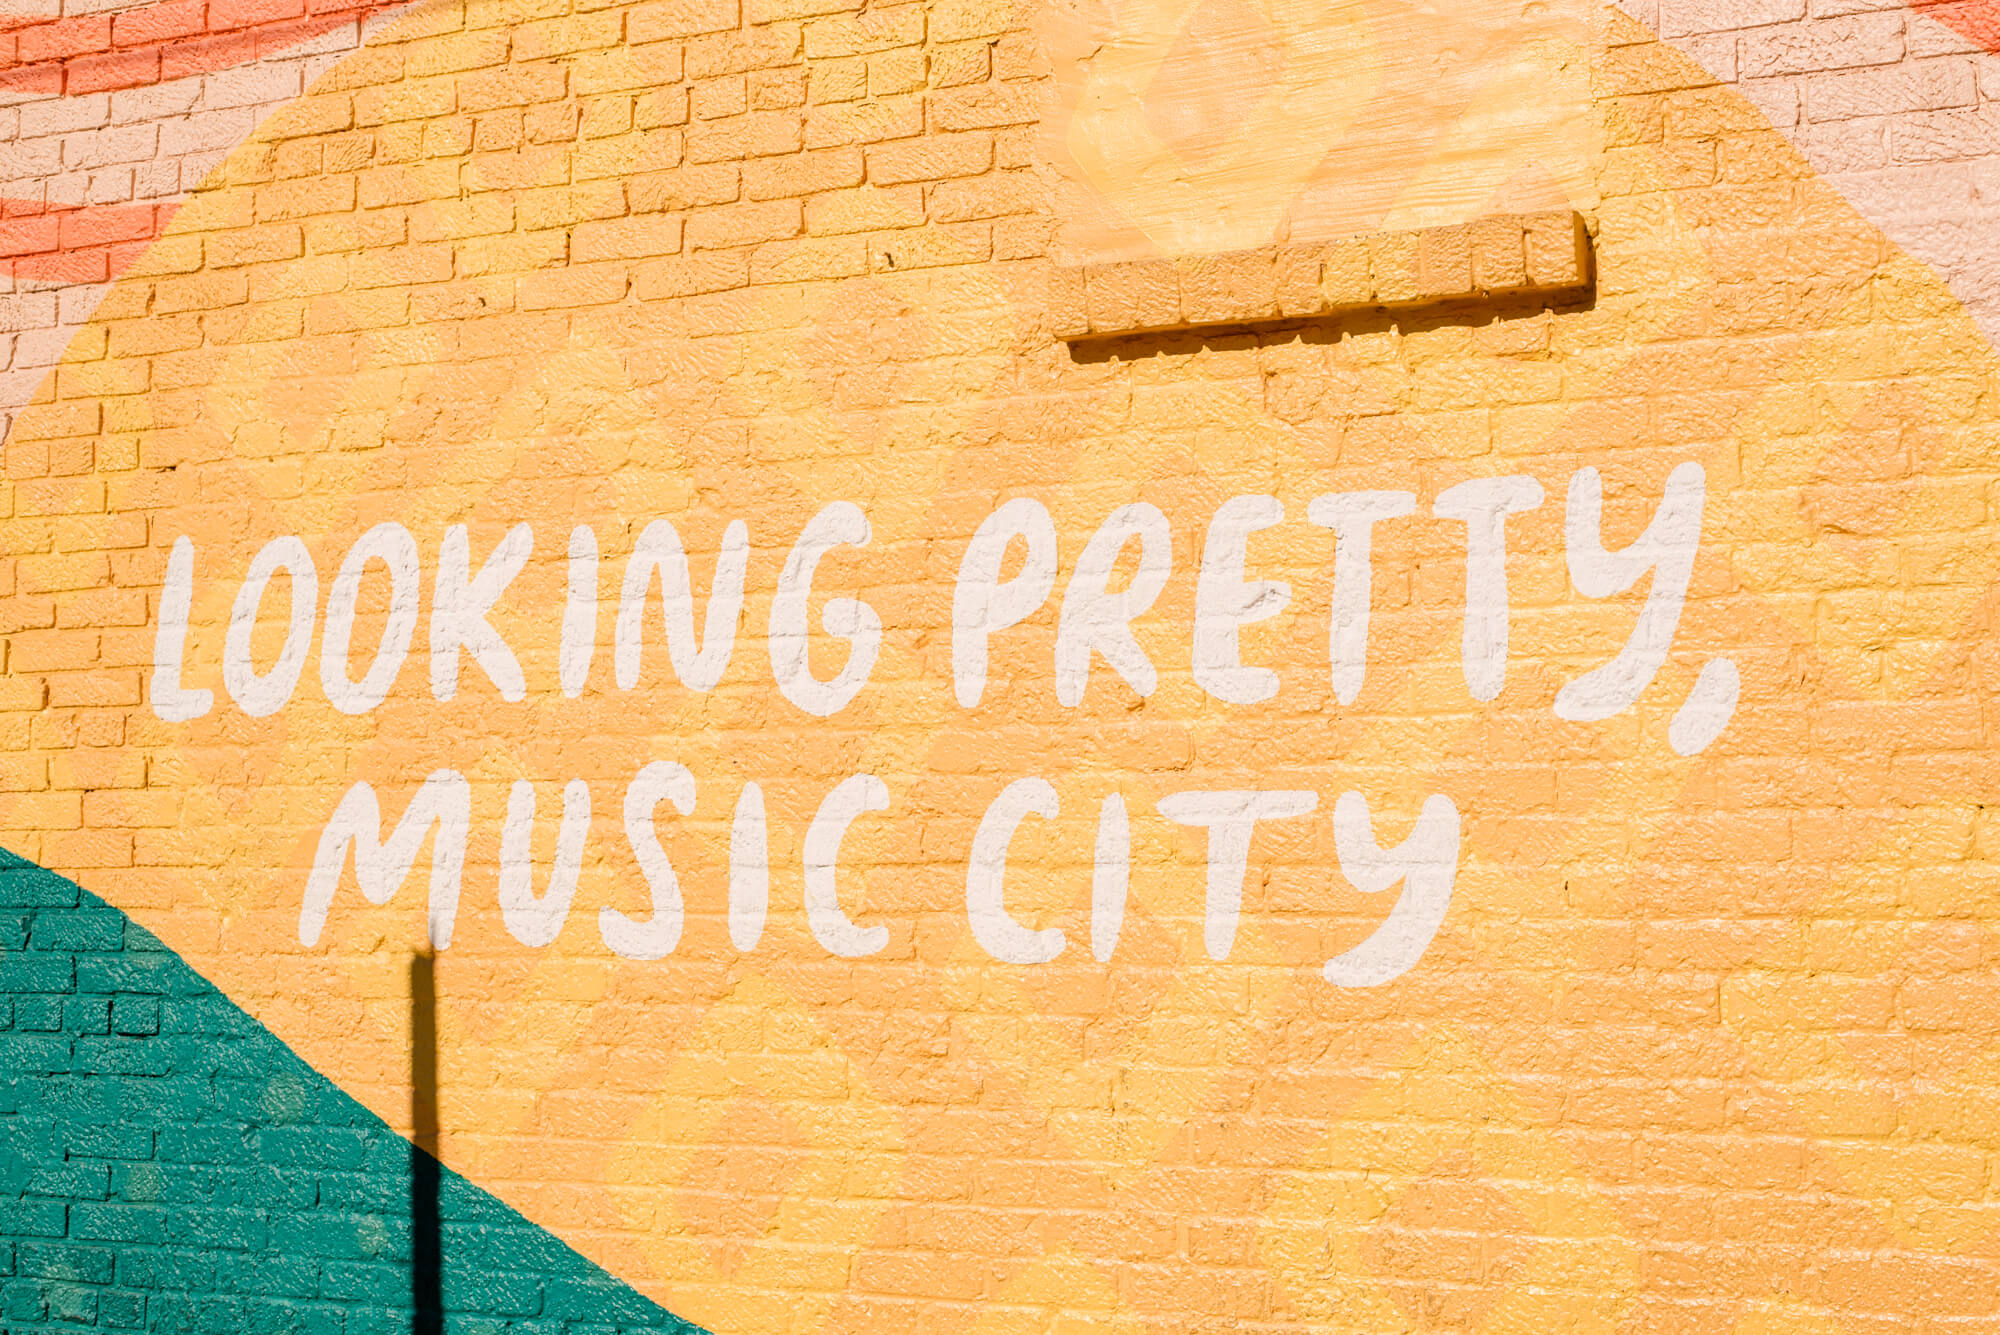 up-close photo of an orange, yellow, and green painted brick wall in Nashville's 12 South neighborhood. White hand-written text reads "Looking pretty, Music City."